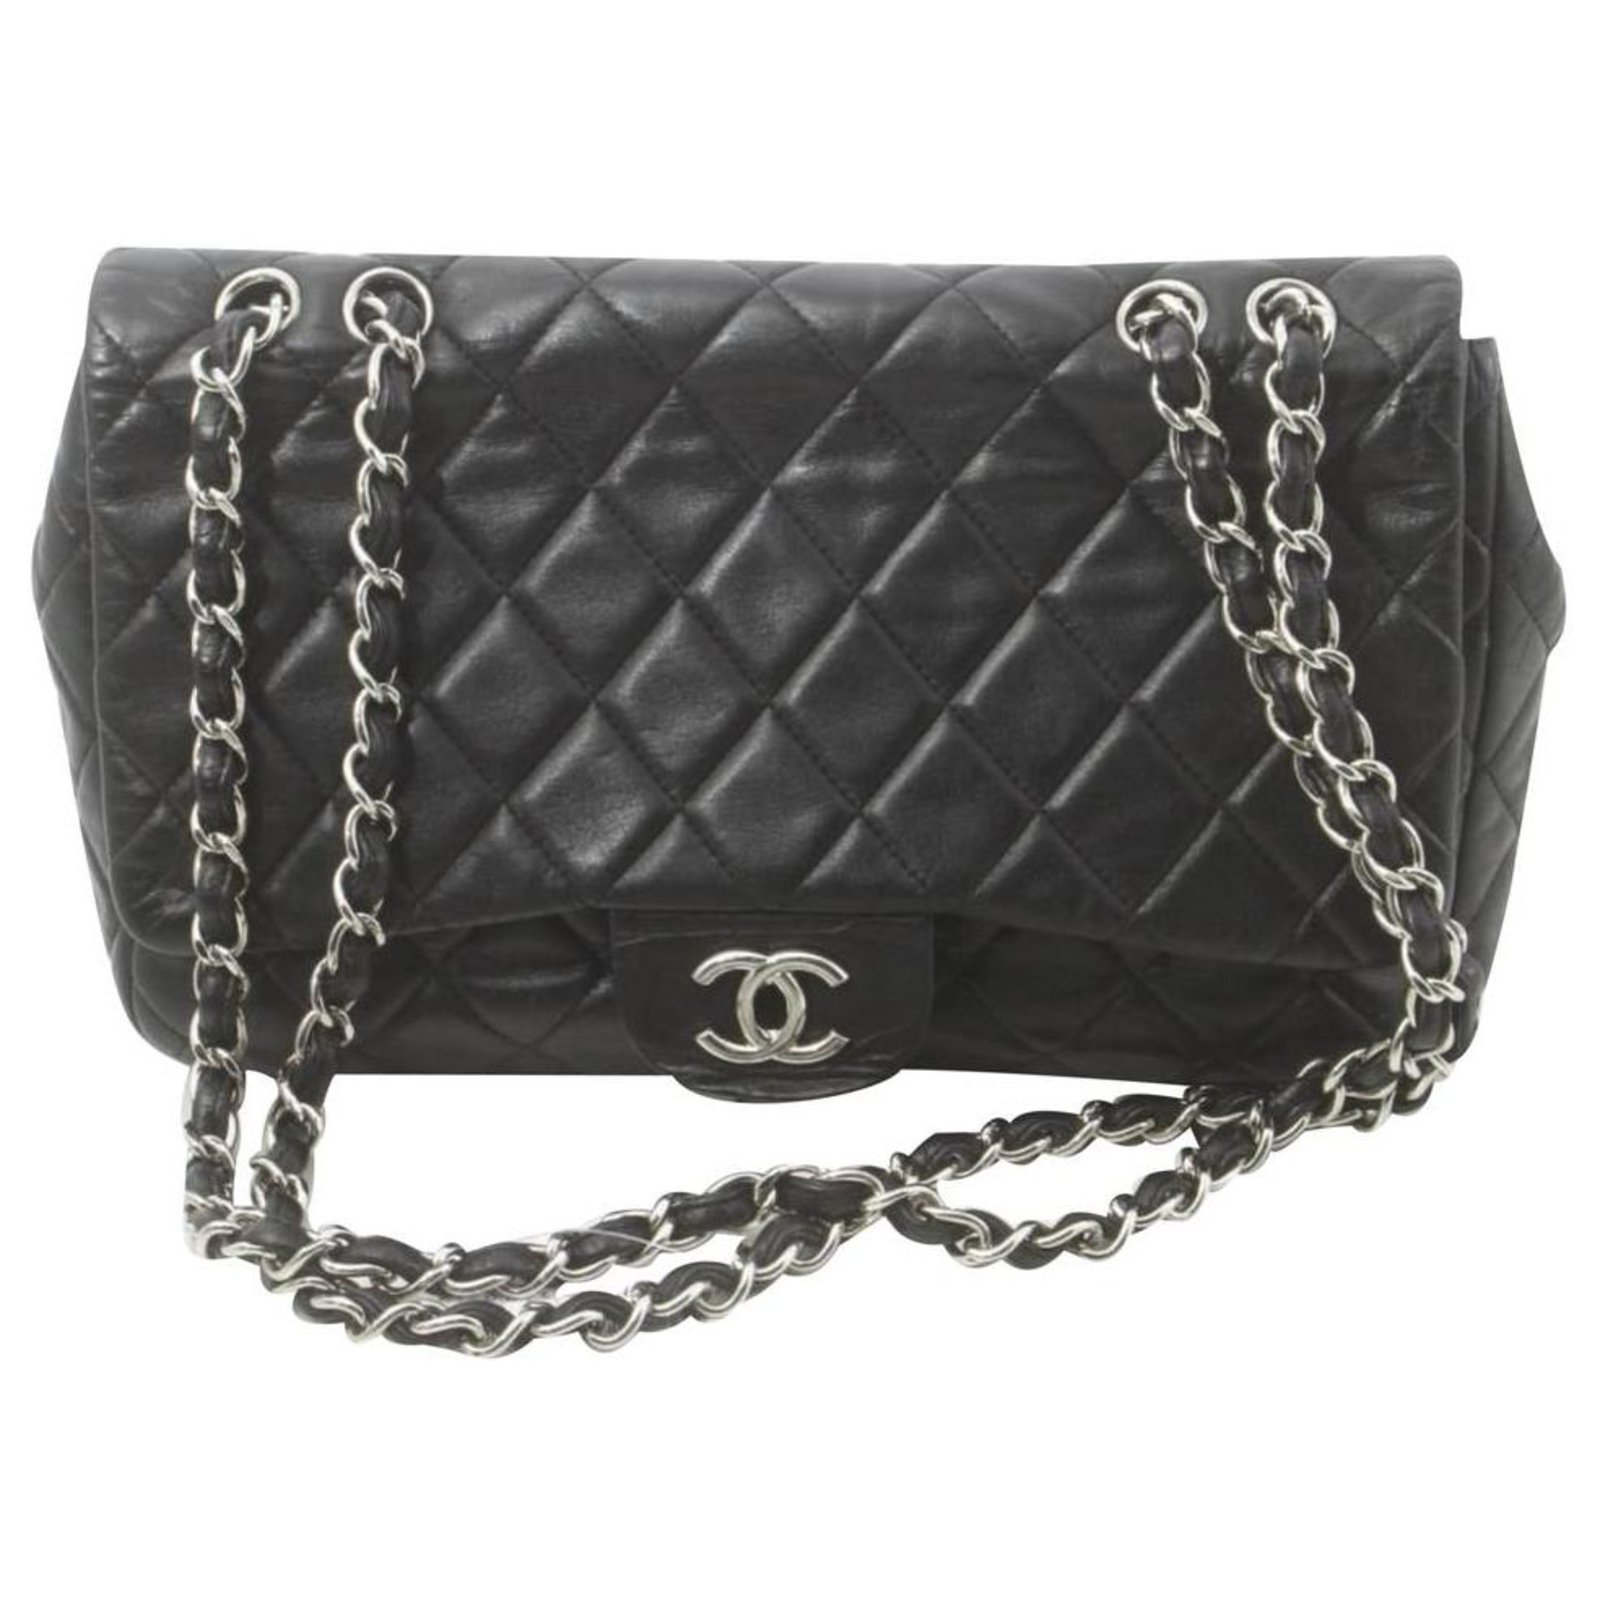 Chanel Black Quilted Lambskin Jumbo Flap Silver Chain Bag Leather